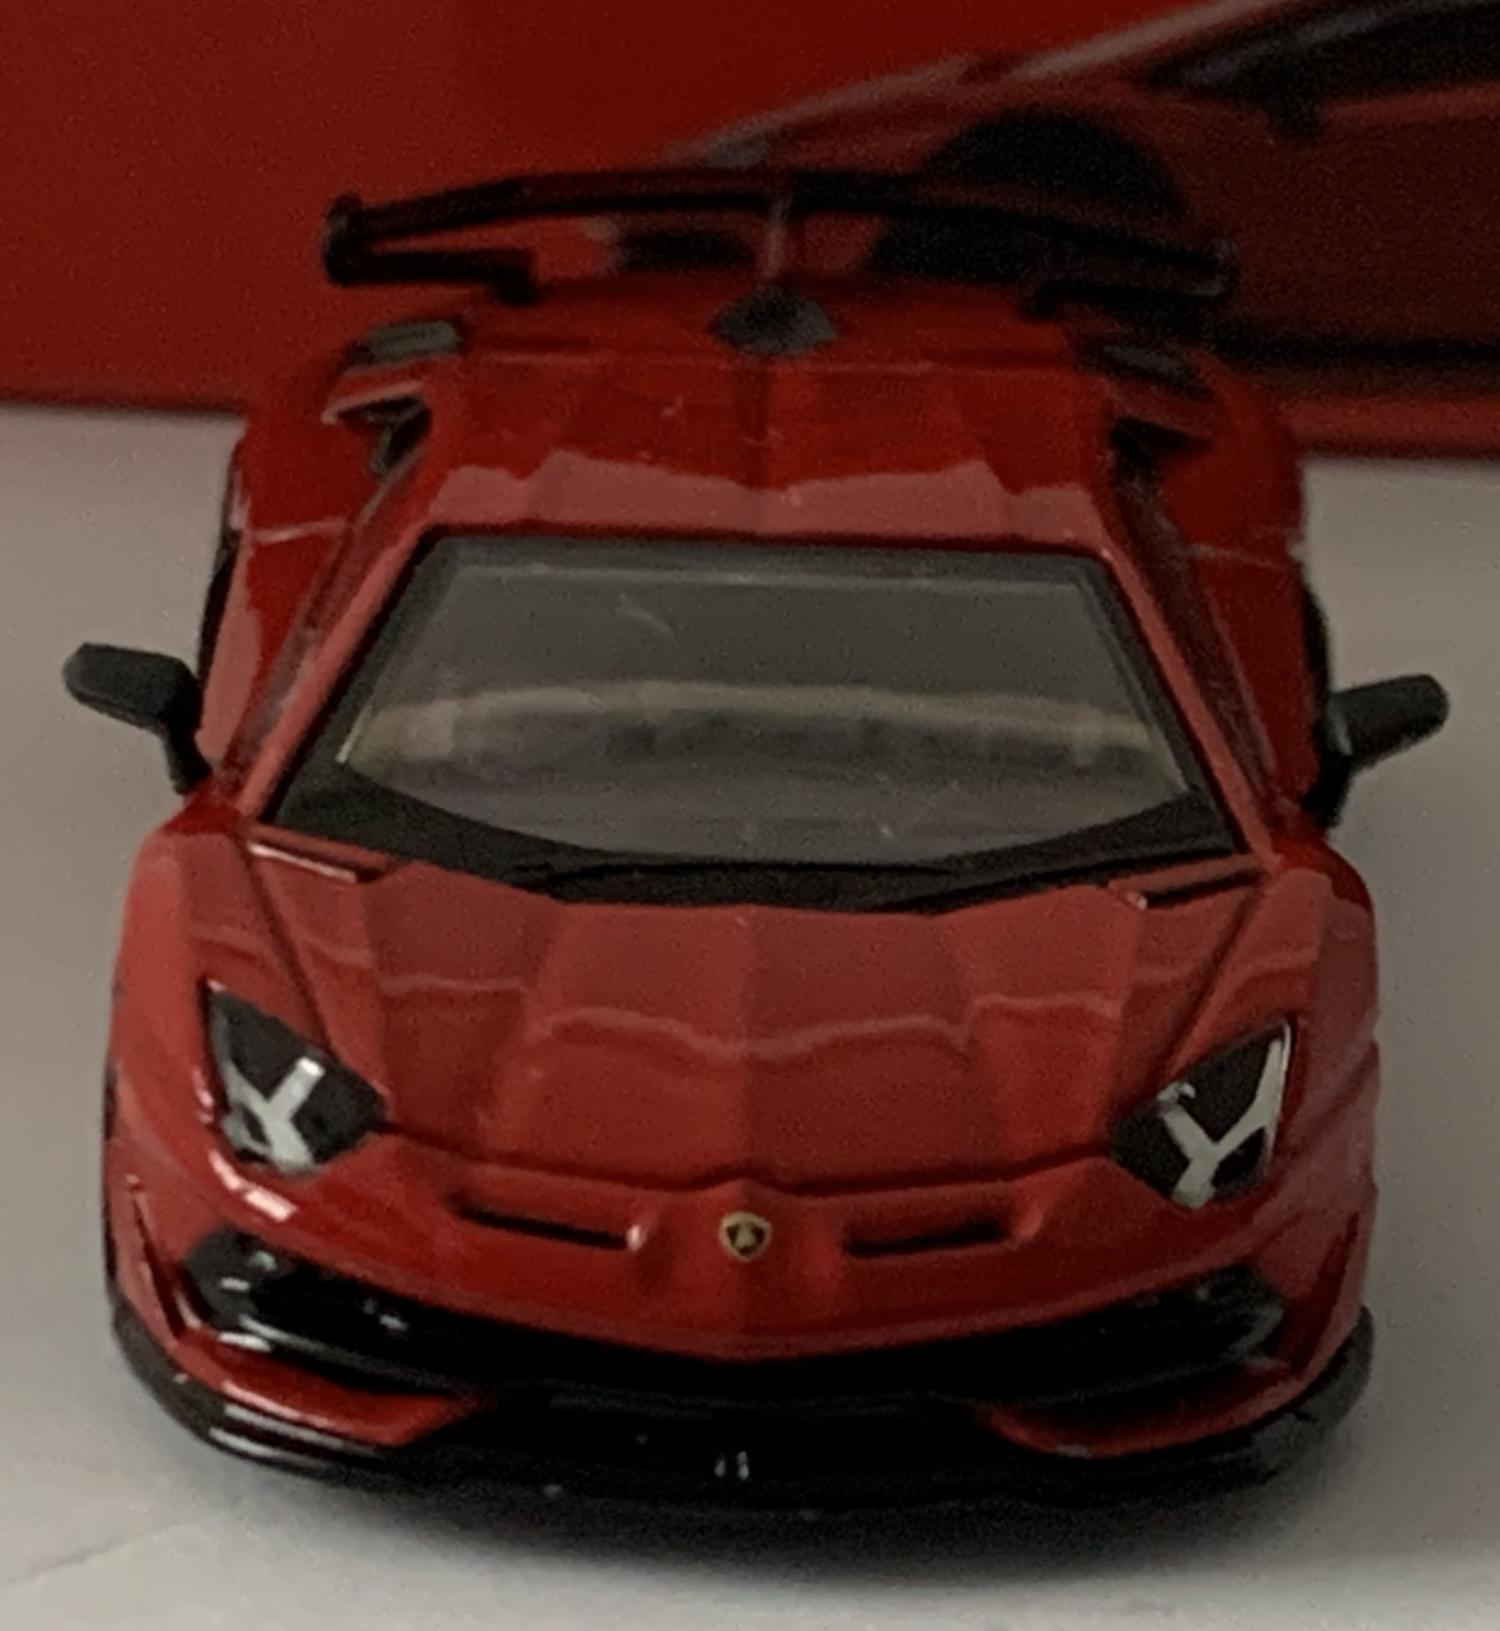 A good reproduction of the Lamborghini Aventador SVJ with detail throughout, all authentically recreated. The model is presented in a box, the car is approx. 7.5 cm long and the box is 10 cm long